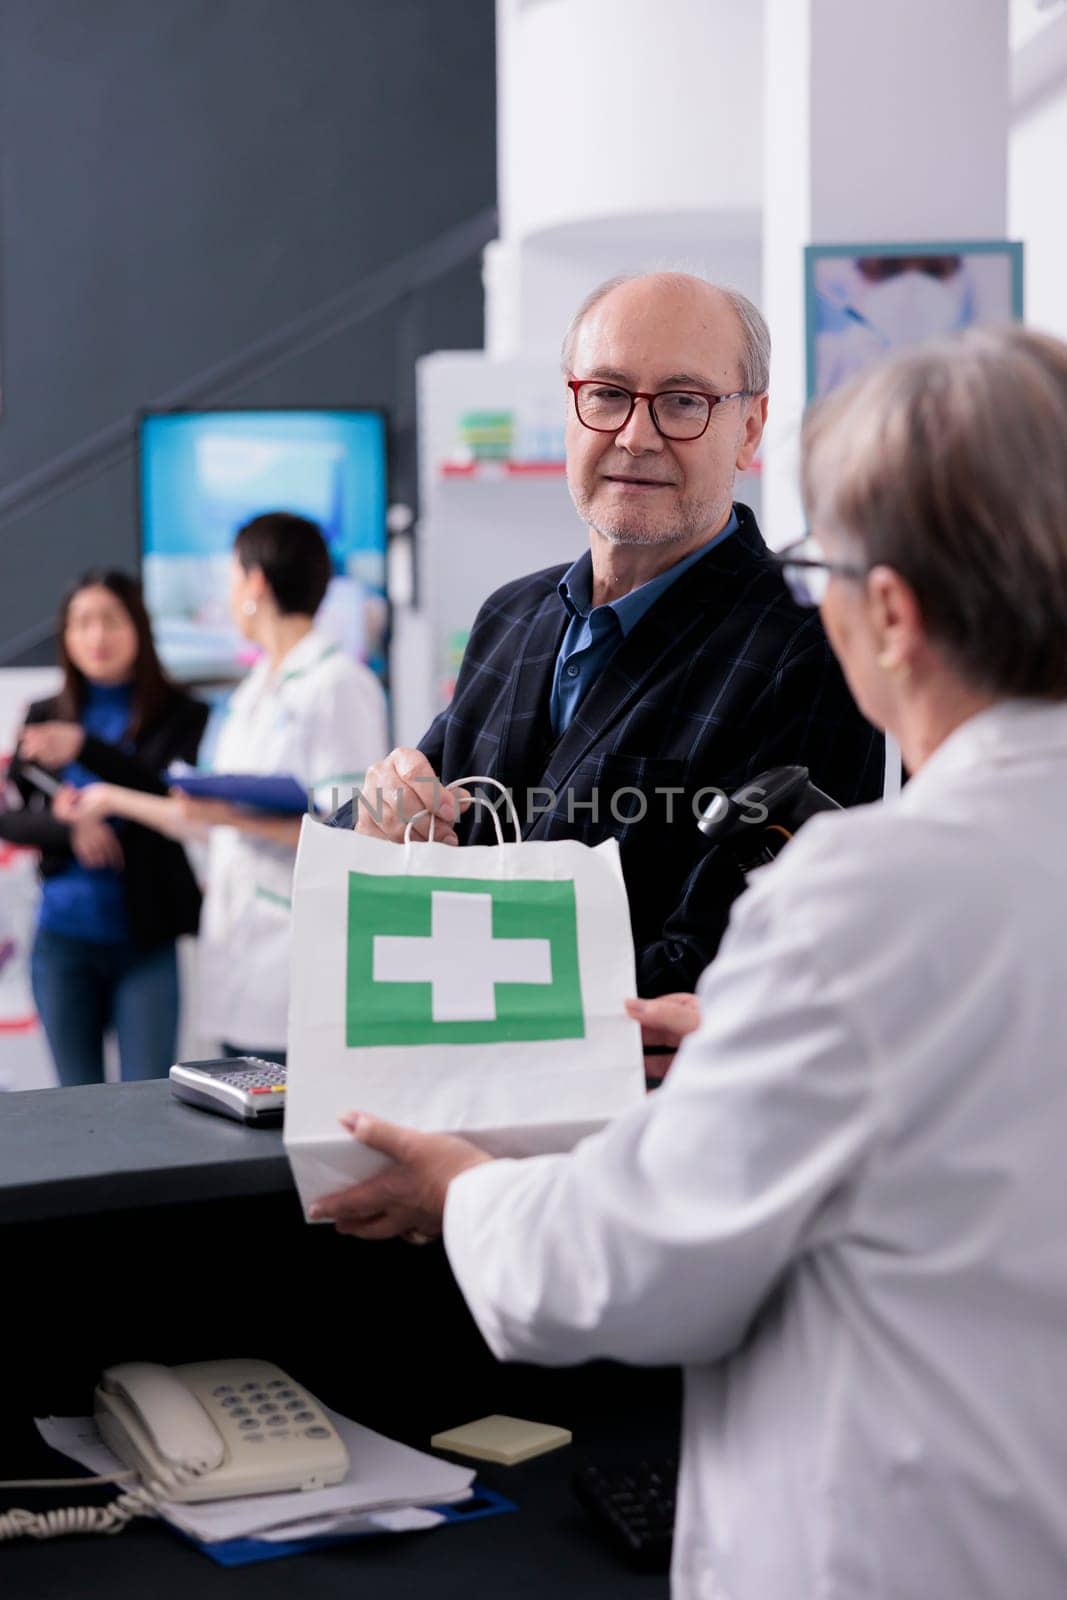 Chemist giving old man drugstore online order at checkout by DCStudio